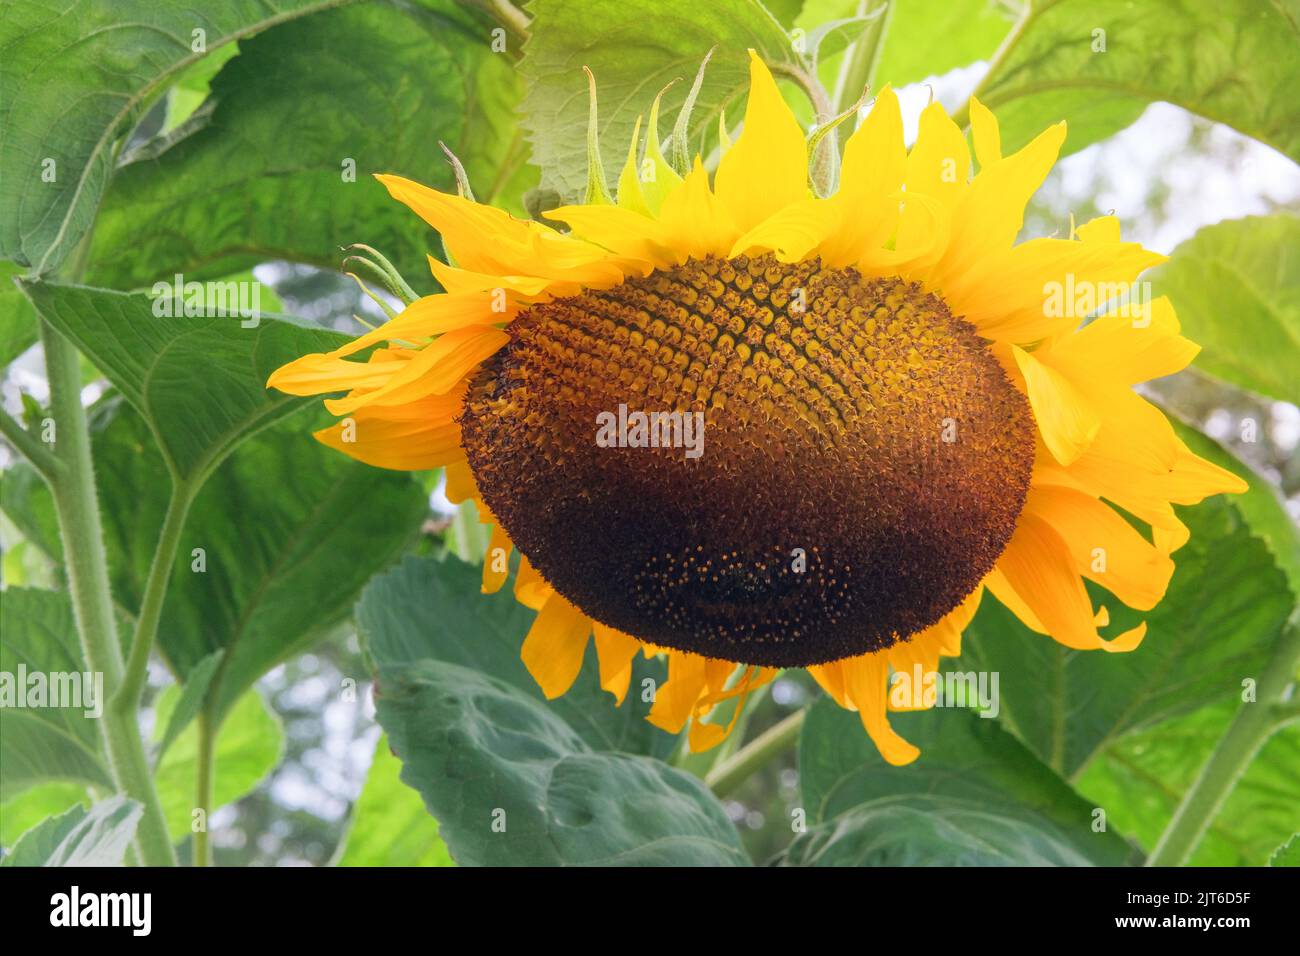 Sunflowers. Yellow bright and vibrant flower. Agriculture autumn background in sunny day. Stock Photo